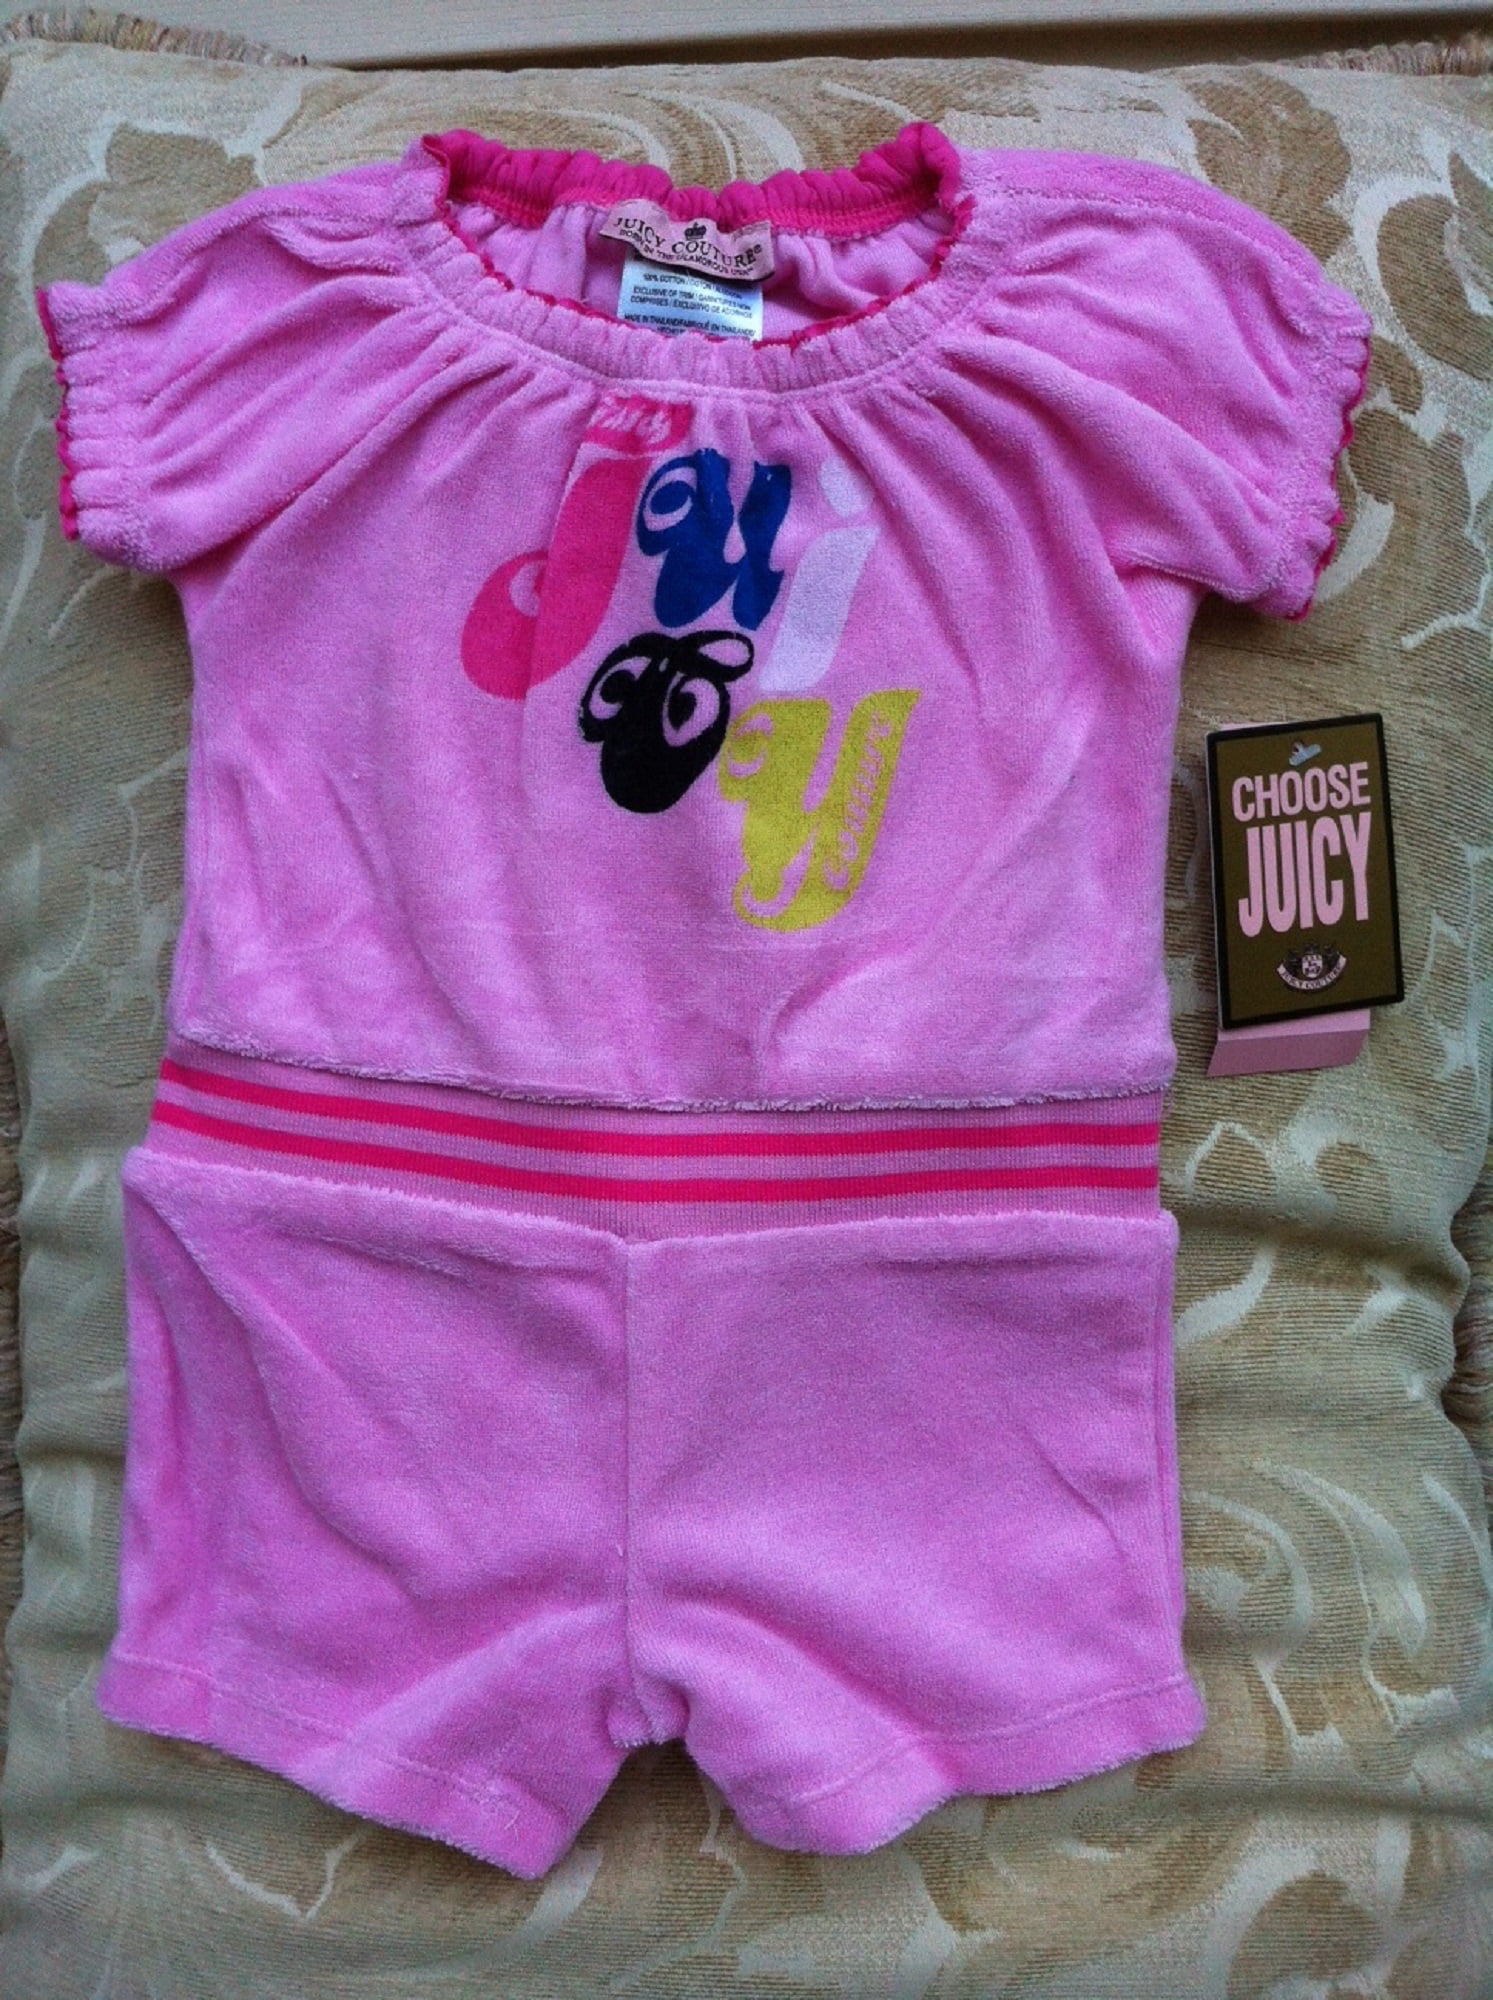 juicy couture baby girl clothes